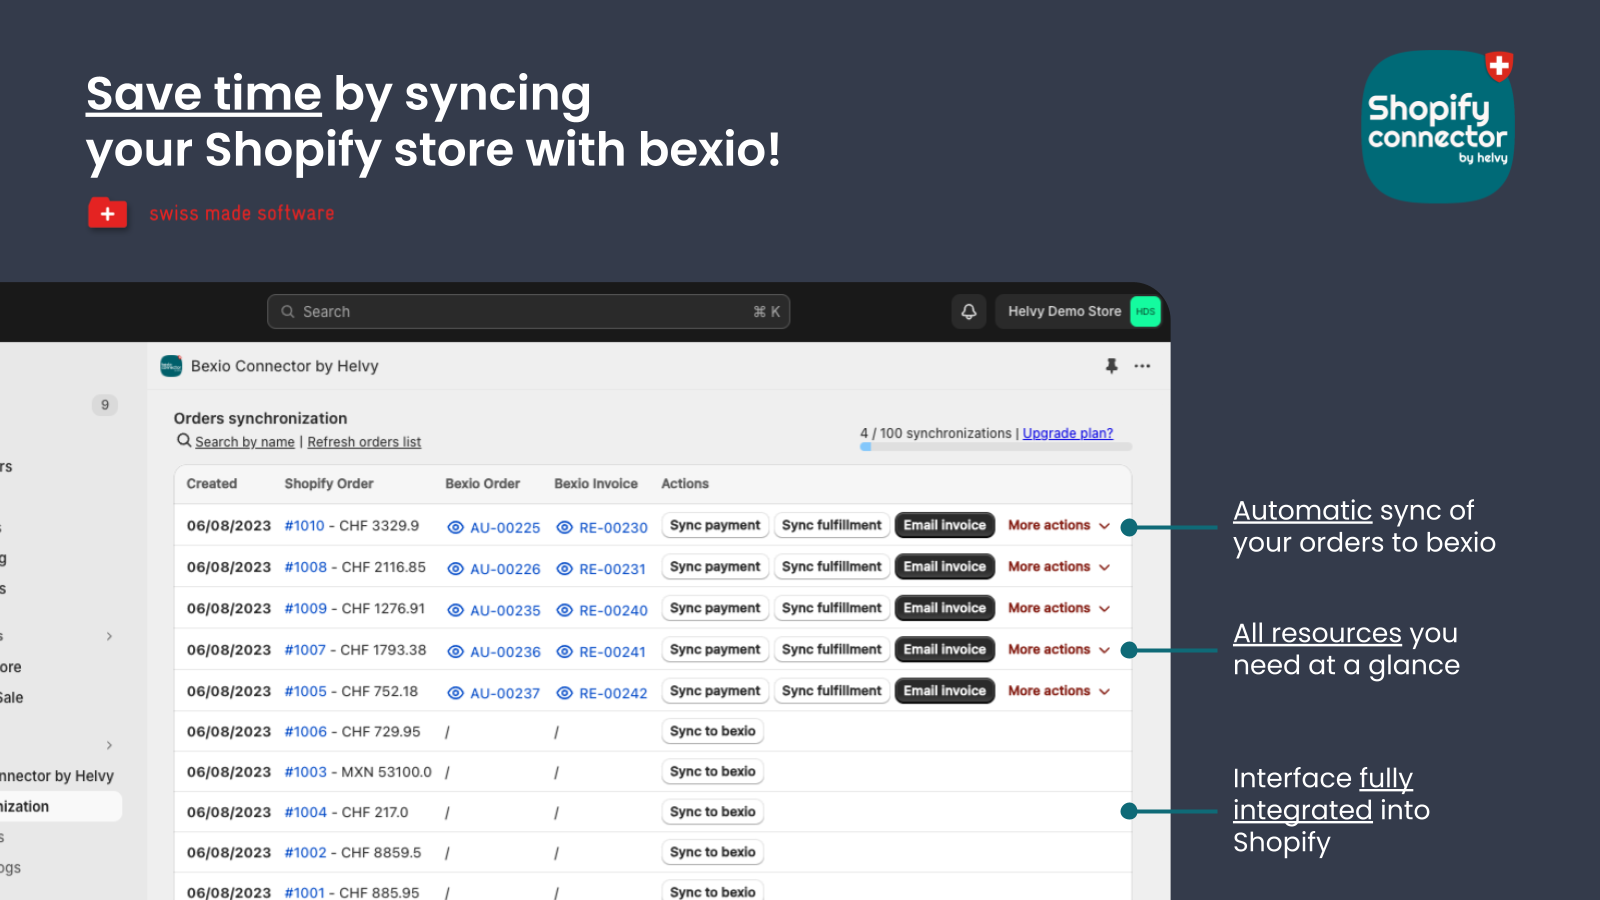 Save time by syncing your Shopify store with bexio!